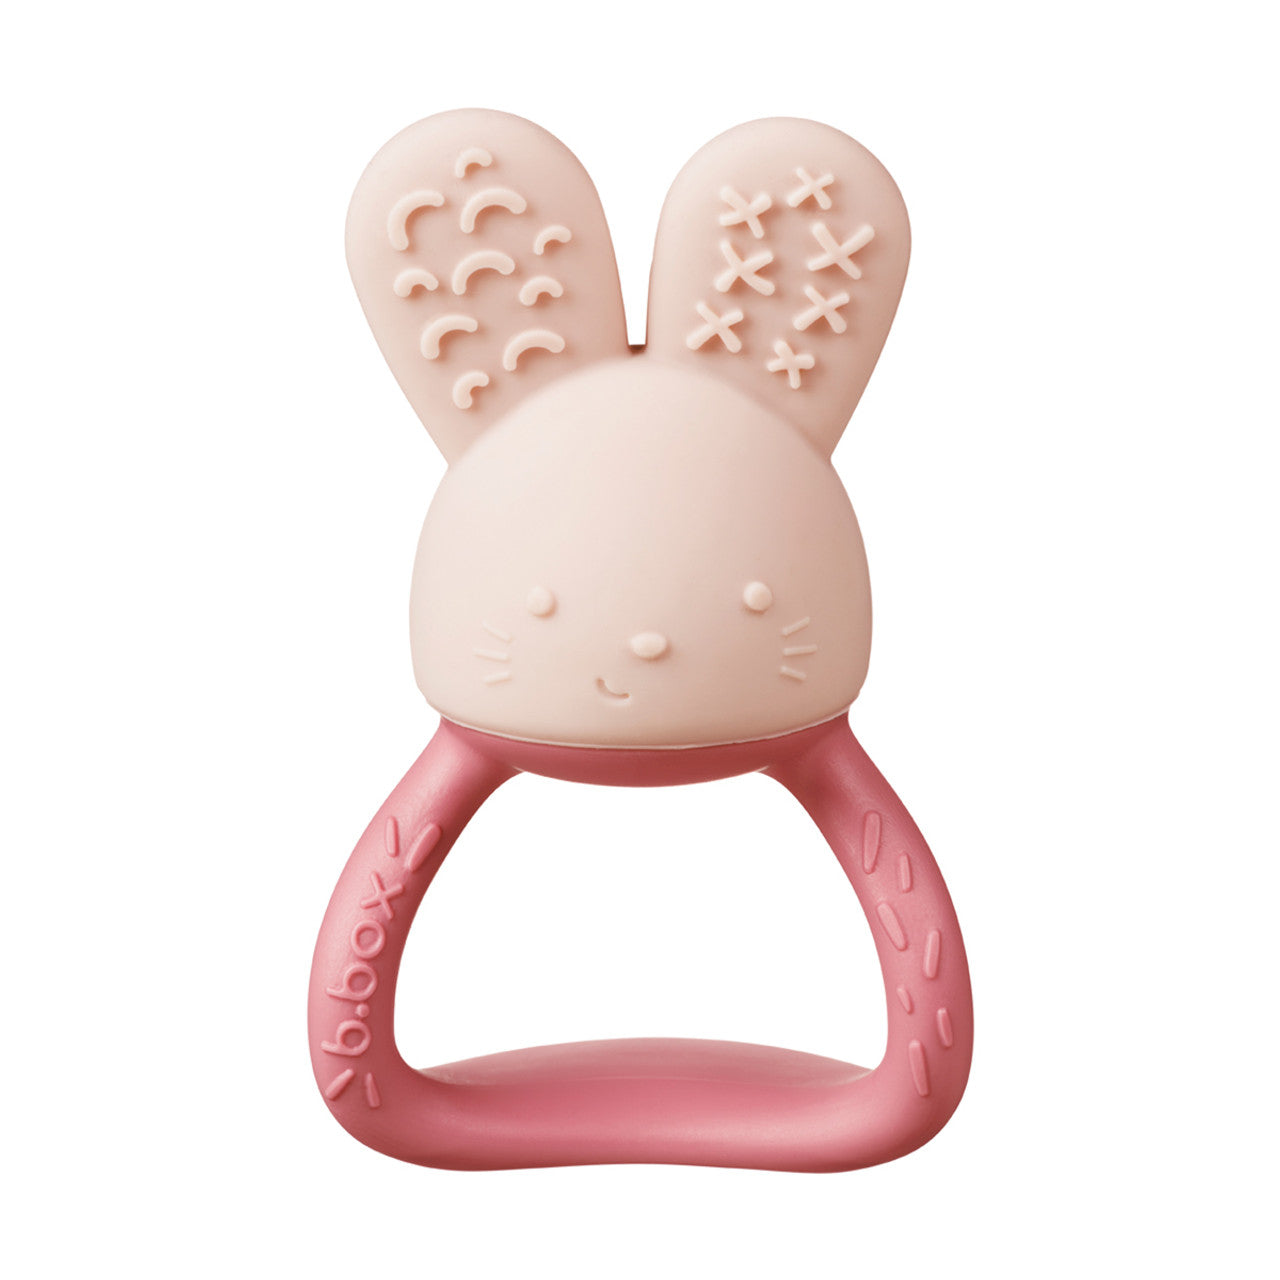 b.box Chill + Fill Teether in Blush available at Bear & Moo